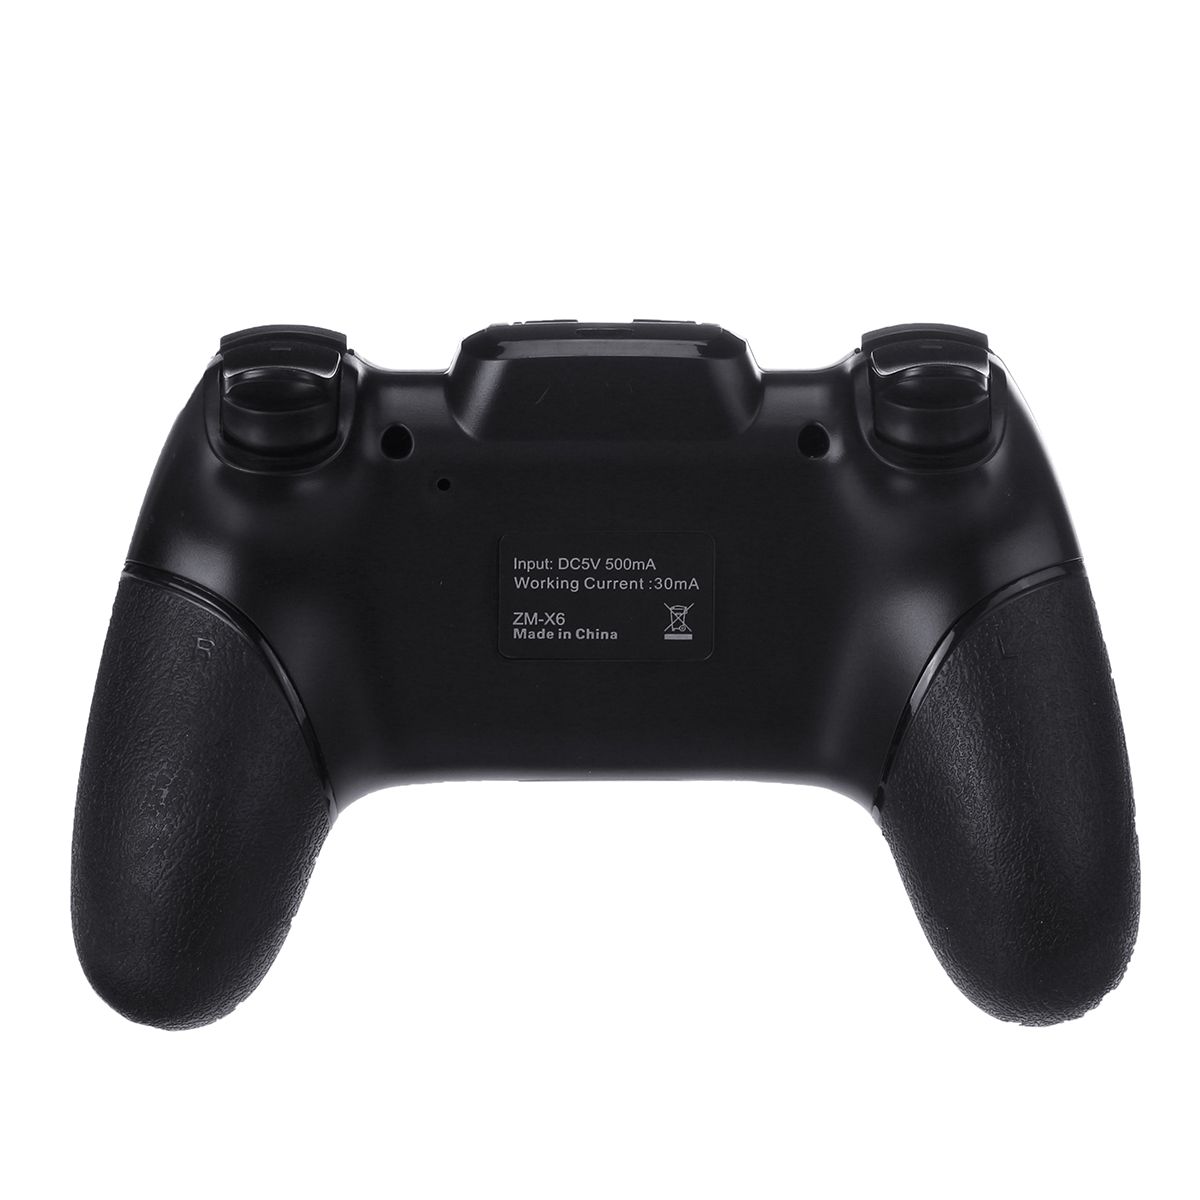 RALAN-X6-Wireless-bluetooth-Game-Controller-Gamepad-Joystick-for-IOS-Android-Mobile-Phone-Tablet-TV--1662118